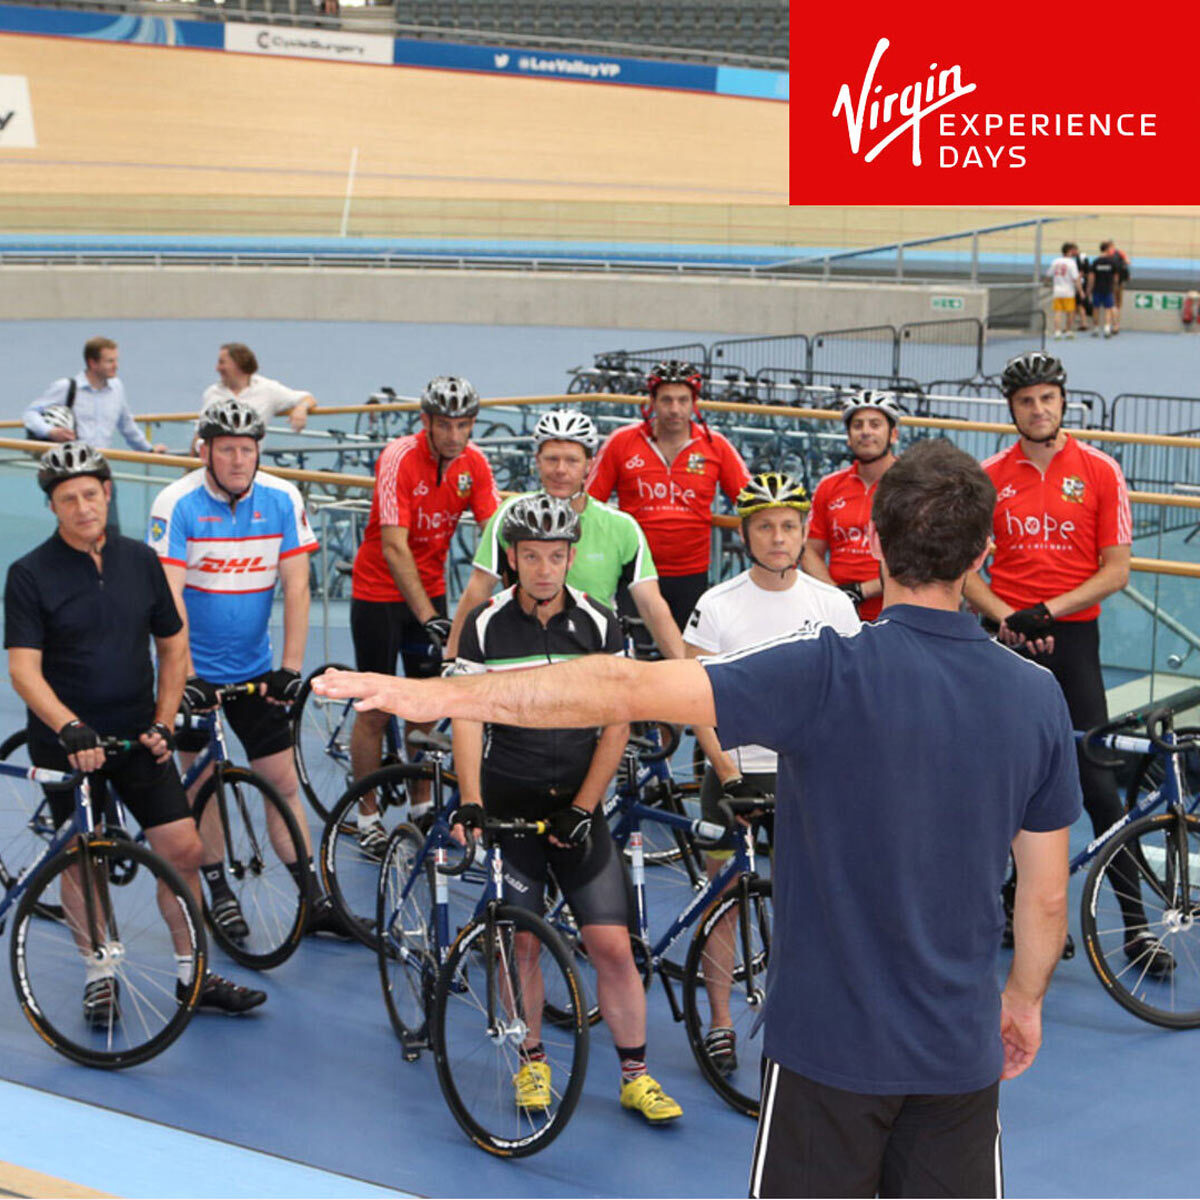 Buy Virgin Experience Velodrome Cycling Experience with GB Gold Medalist Image2 at Costco.co.uk